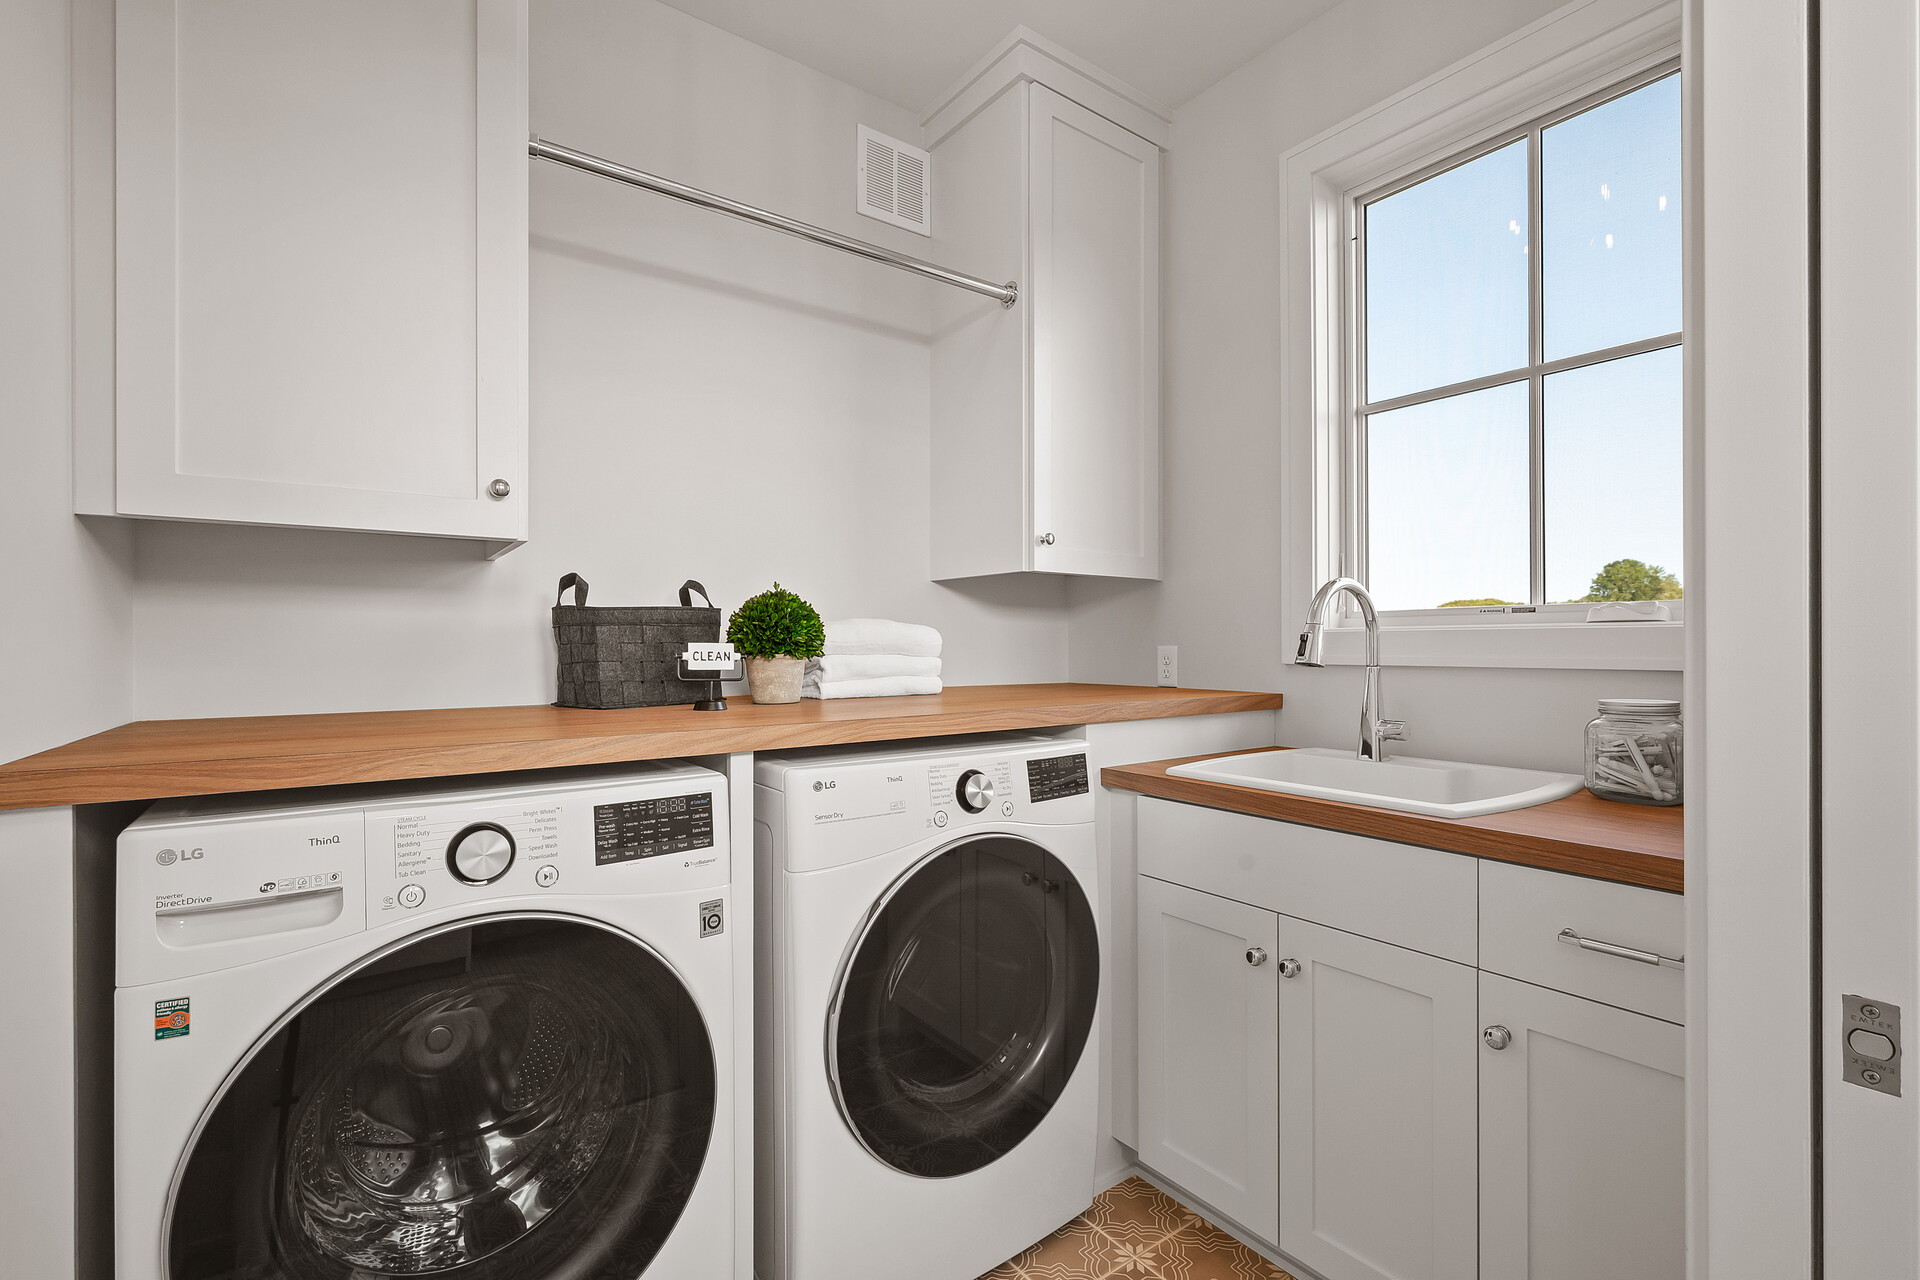 A prairie transitional laundry room with a washer and dryer in a custom home.